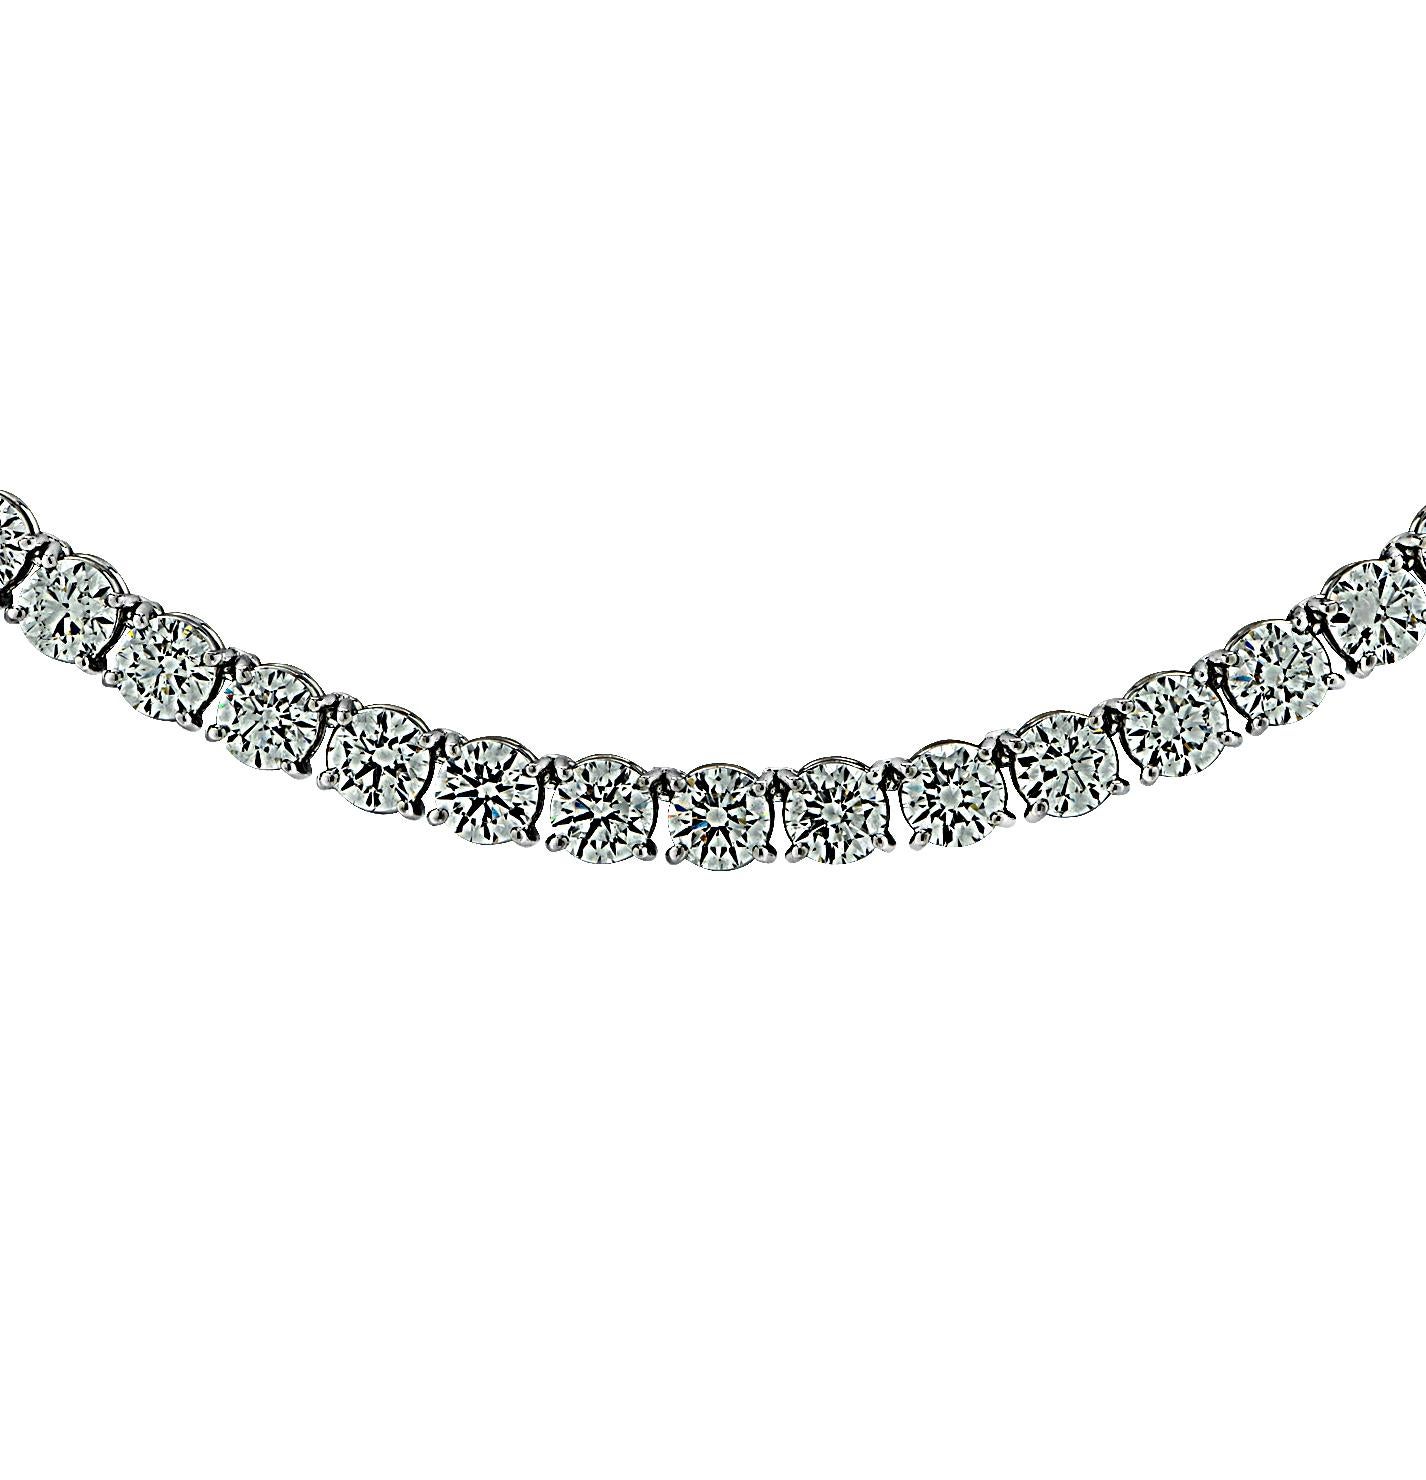 Exquisite Vivid Diamonds Straight Line diamond tennis necklace crafted in Platinum, showcasing 107 round brilliant cut diamonds weighing 28 carats, D-E color, VS2-SI1 Clarity. Each diamond was carefully selected, perfectly matched and set in a